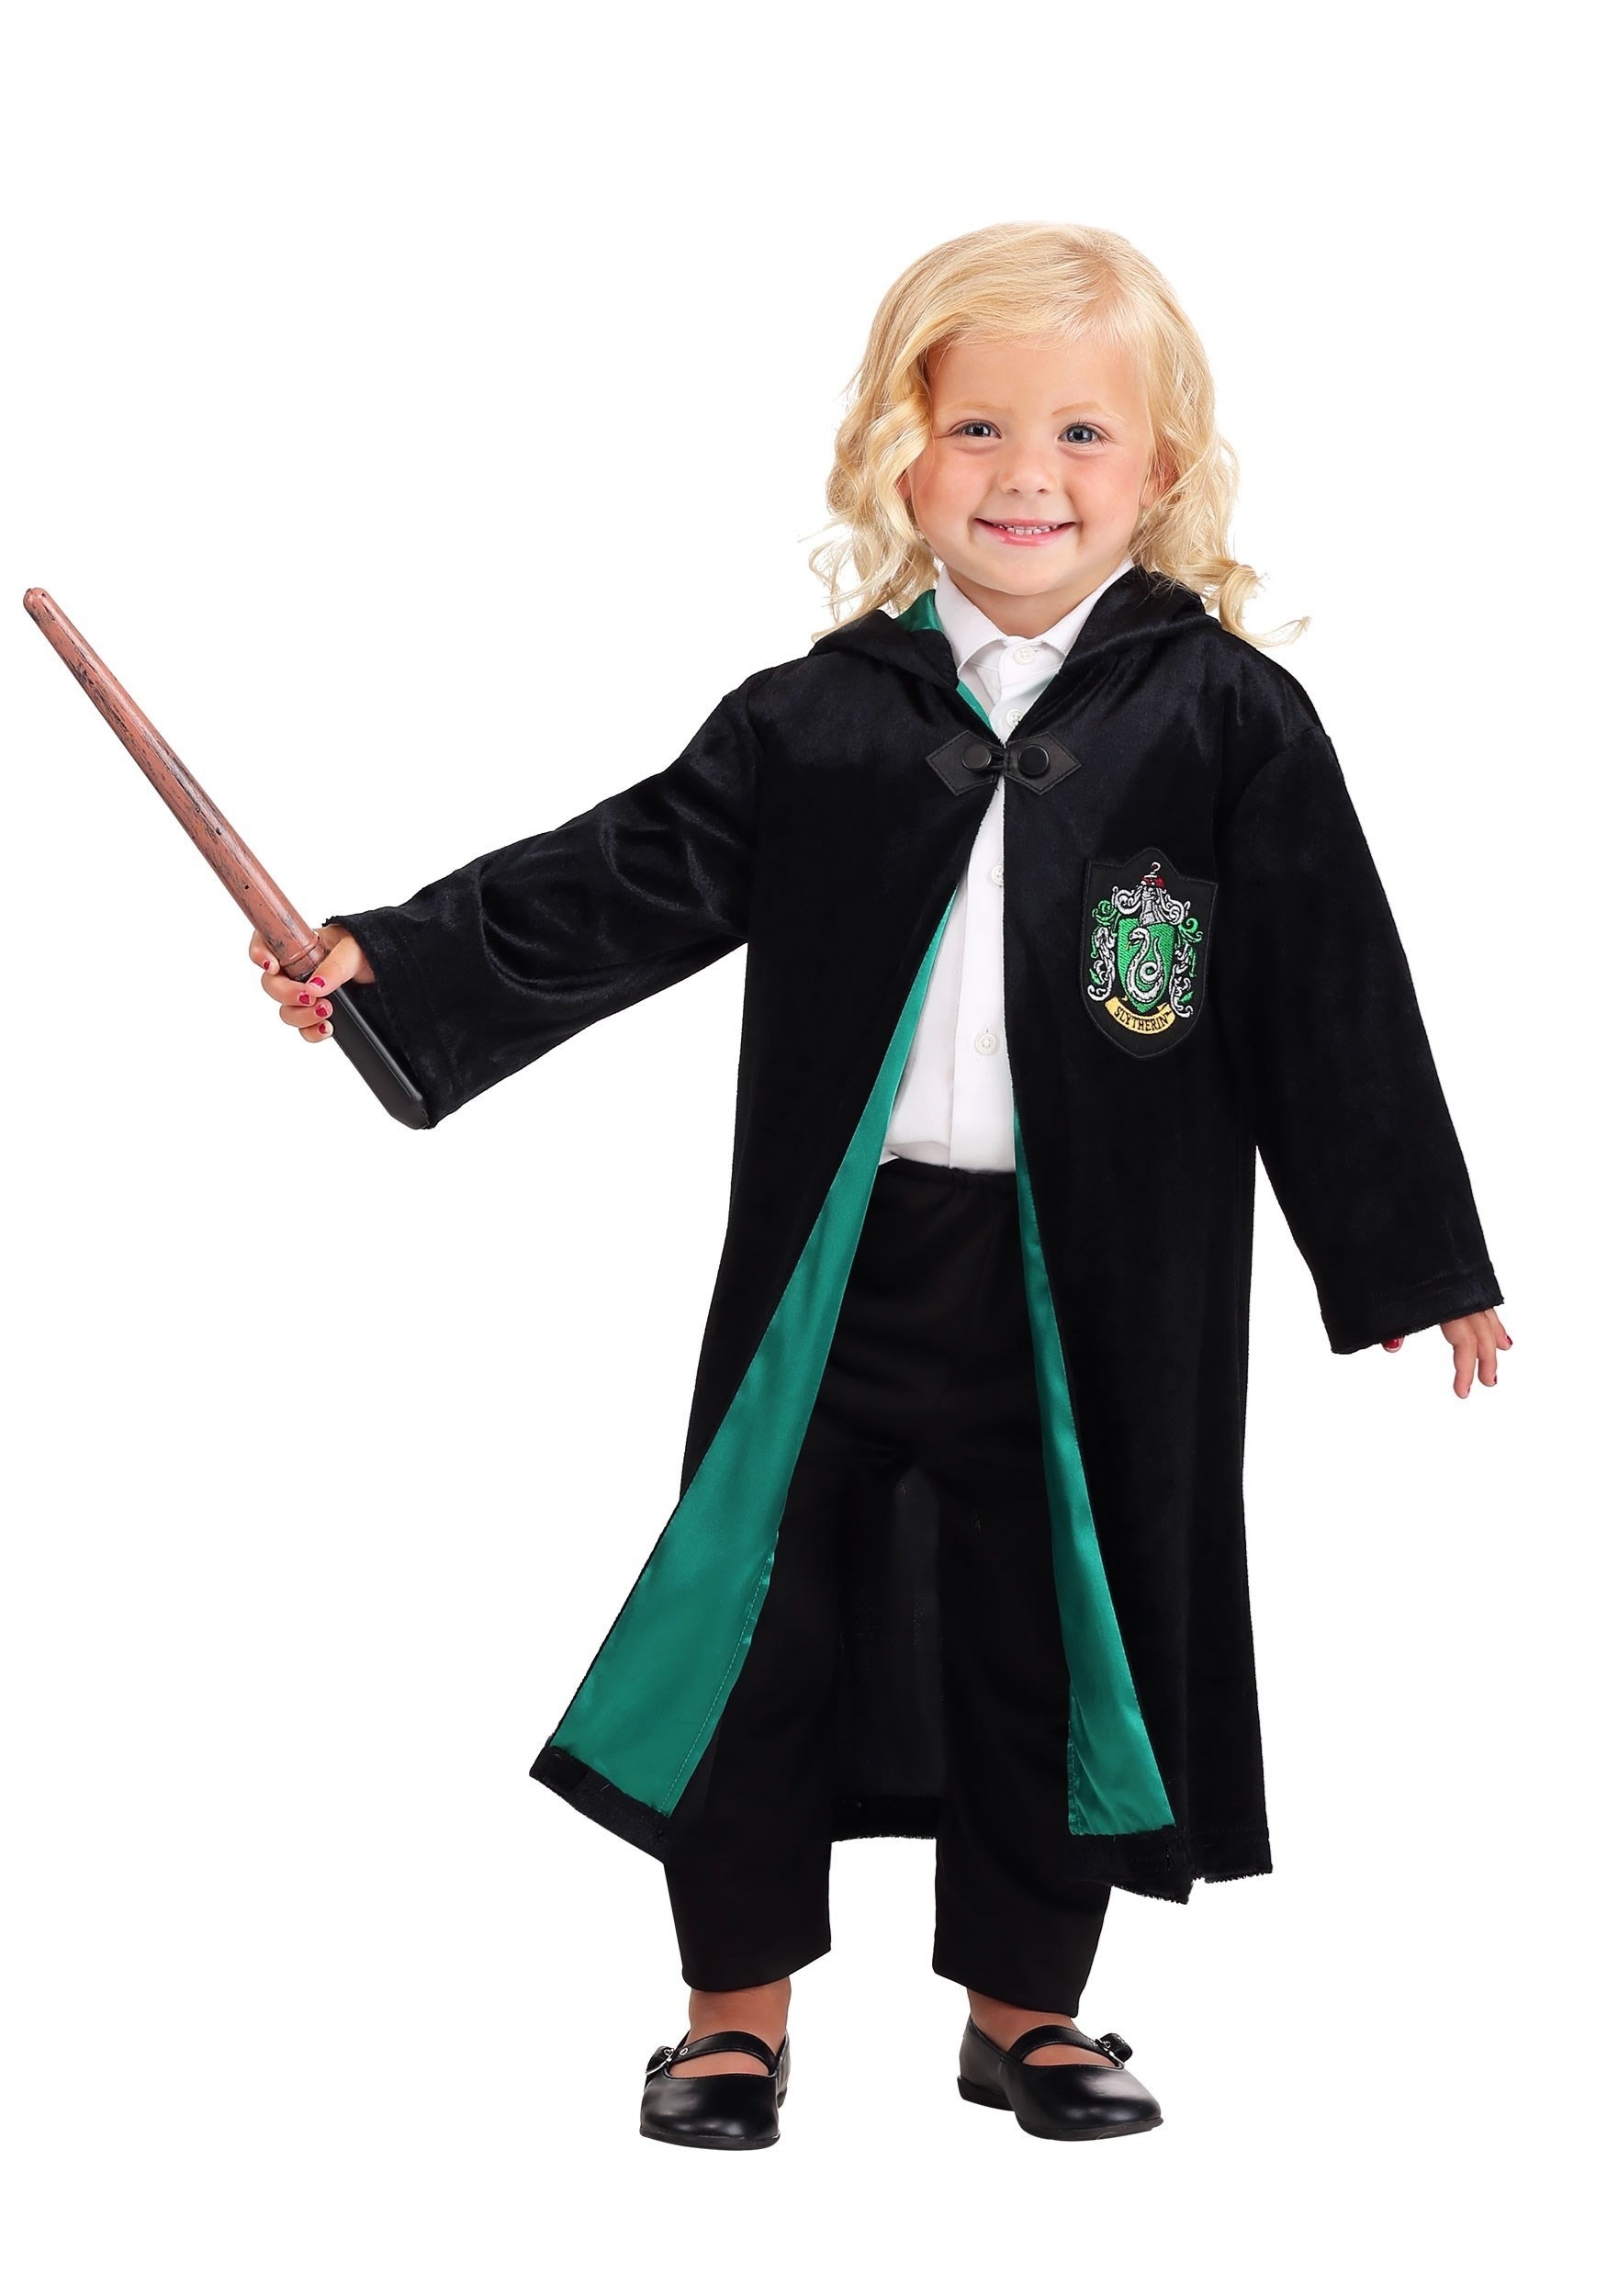 Toddler Harry Potter Deluxe Slytherin Robe